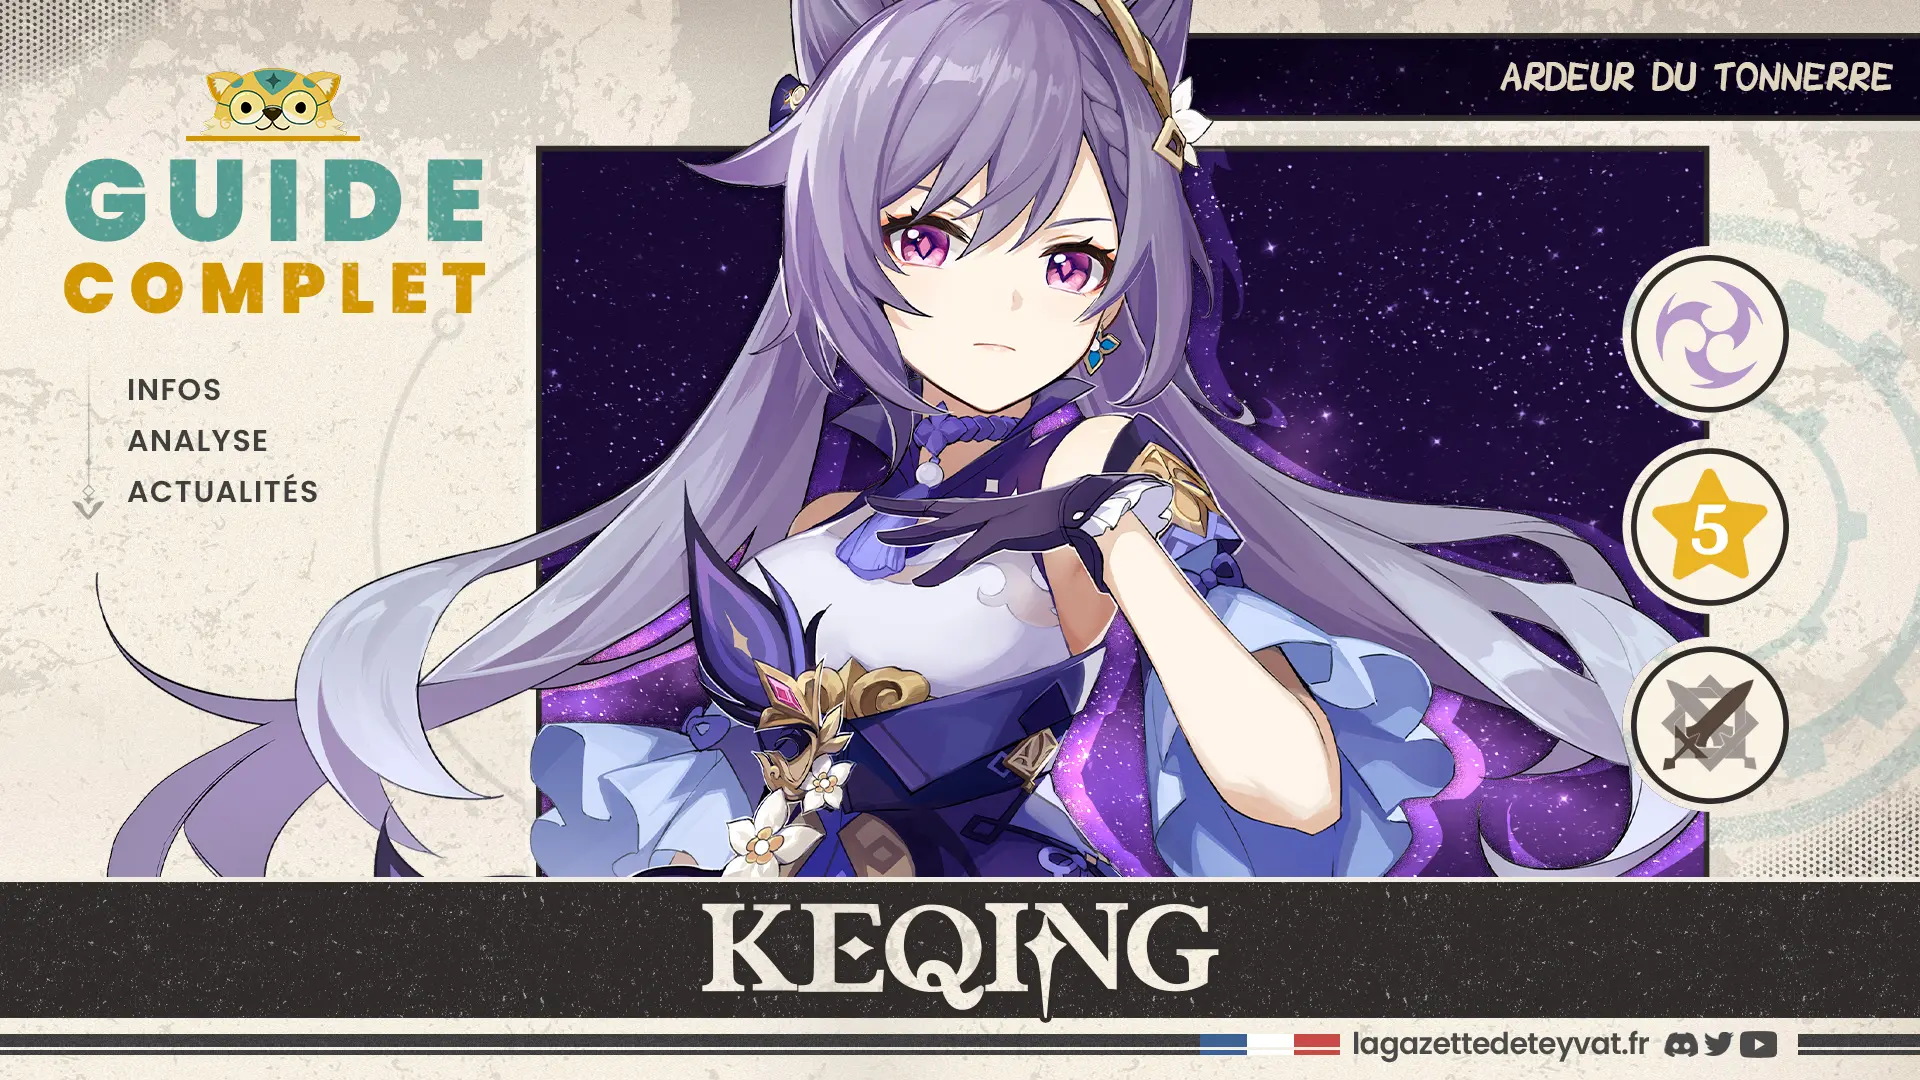 Keqing Genshin Impact, guide complet, farm, build, synergies, rotations